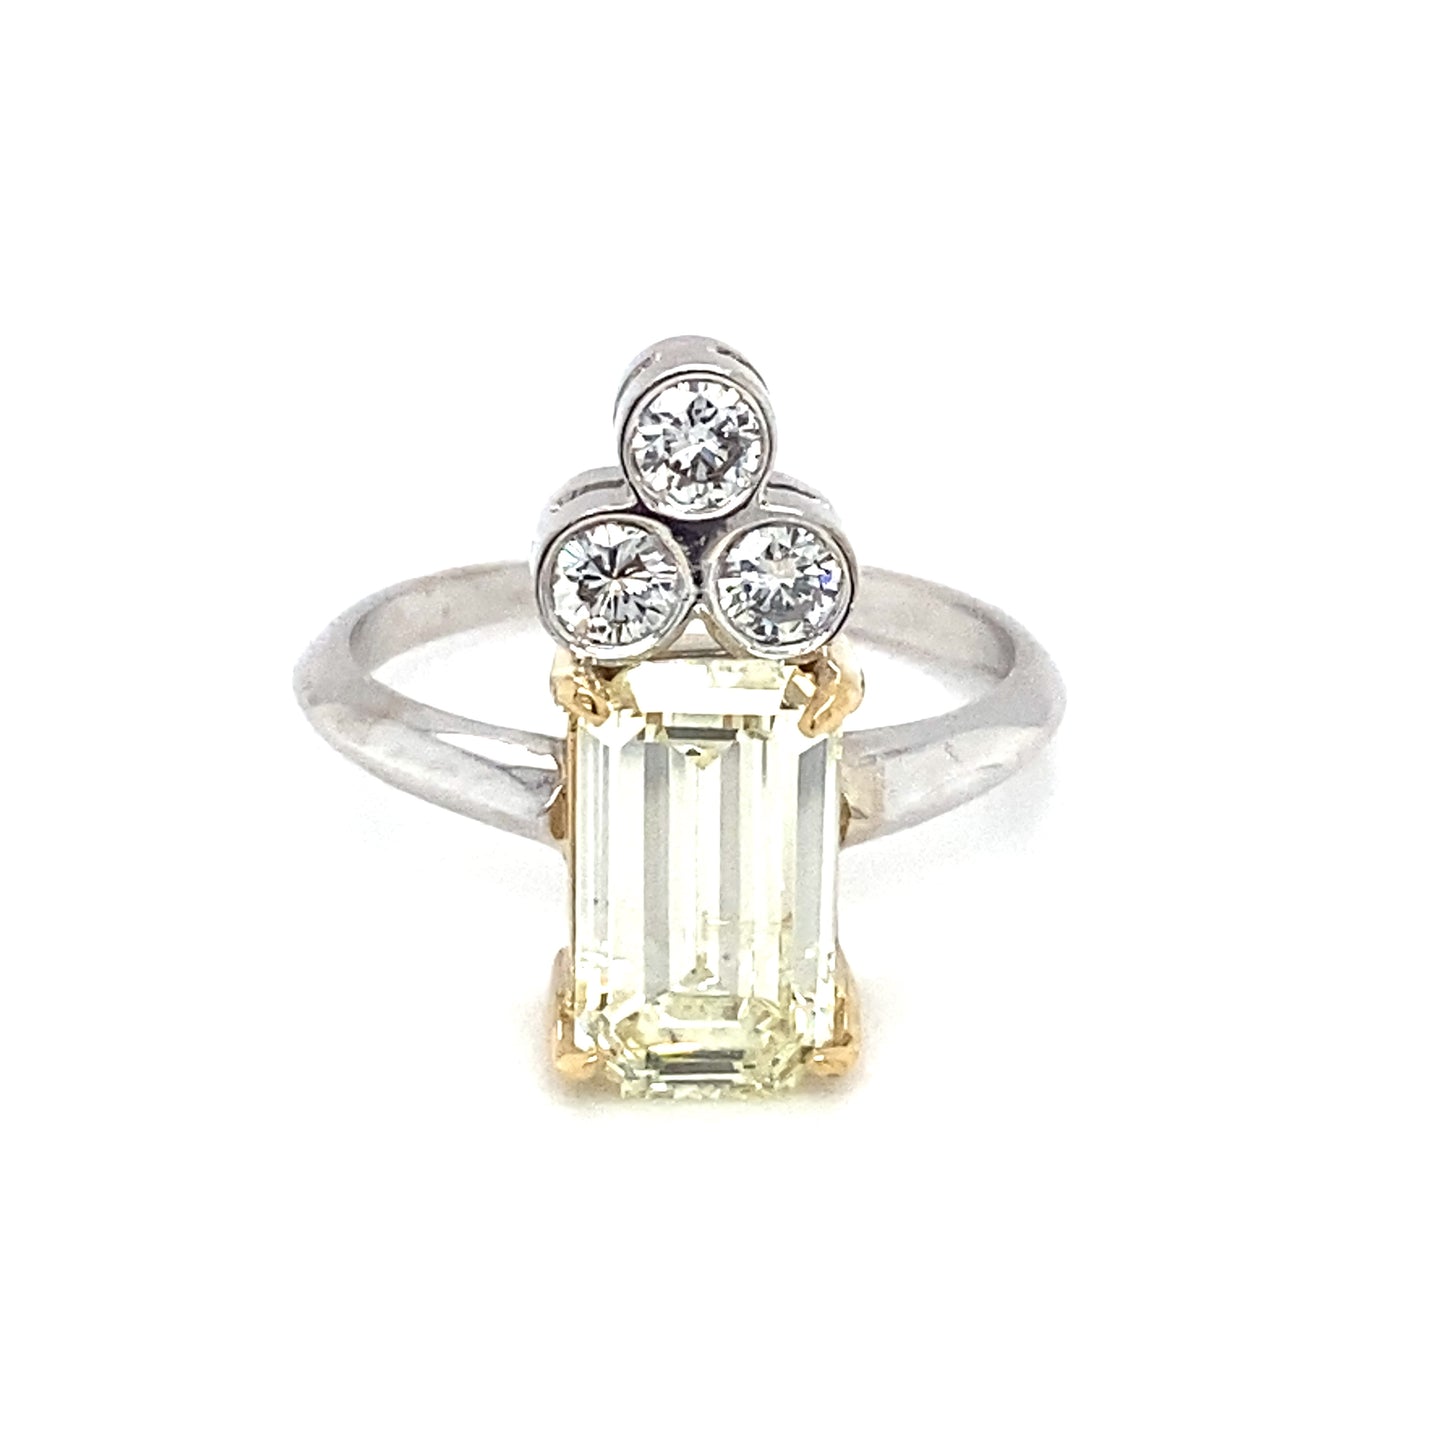 Emerald Cut 2.20ct Diamond Cocktail Ring in 14K White Gold and Platinum